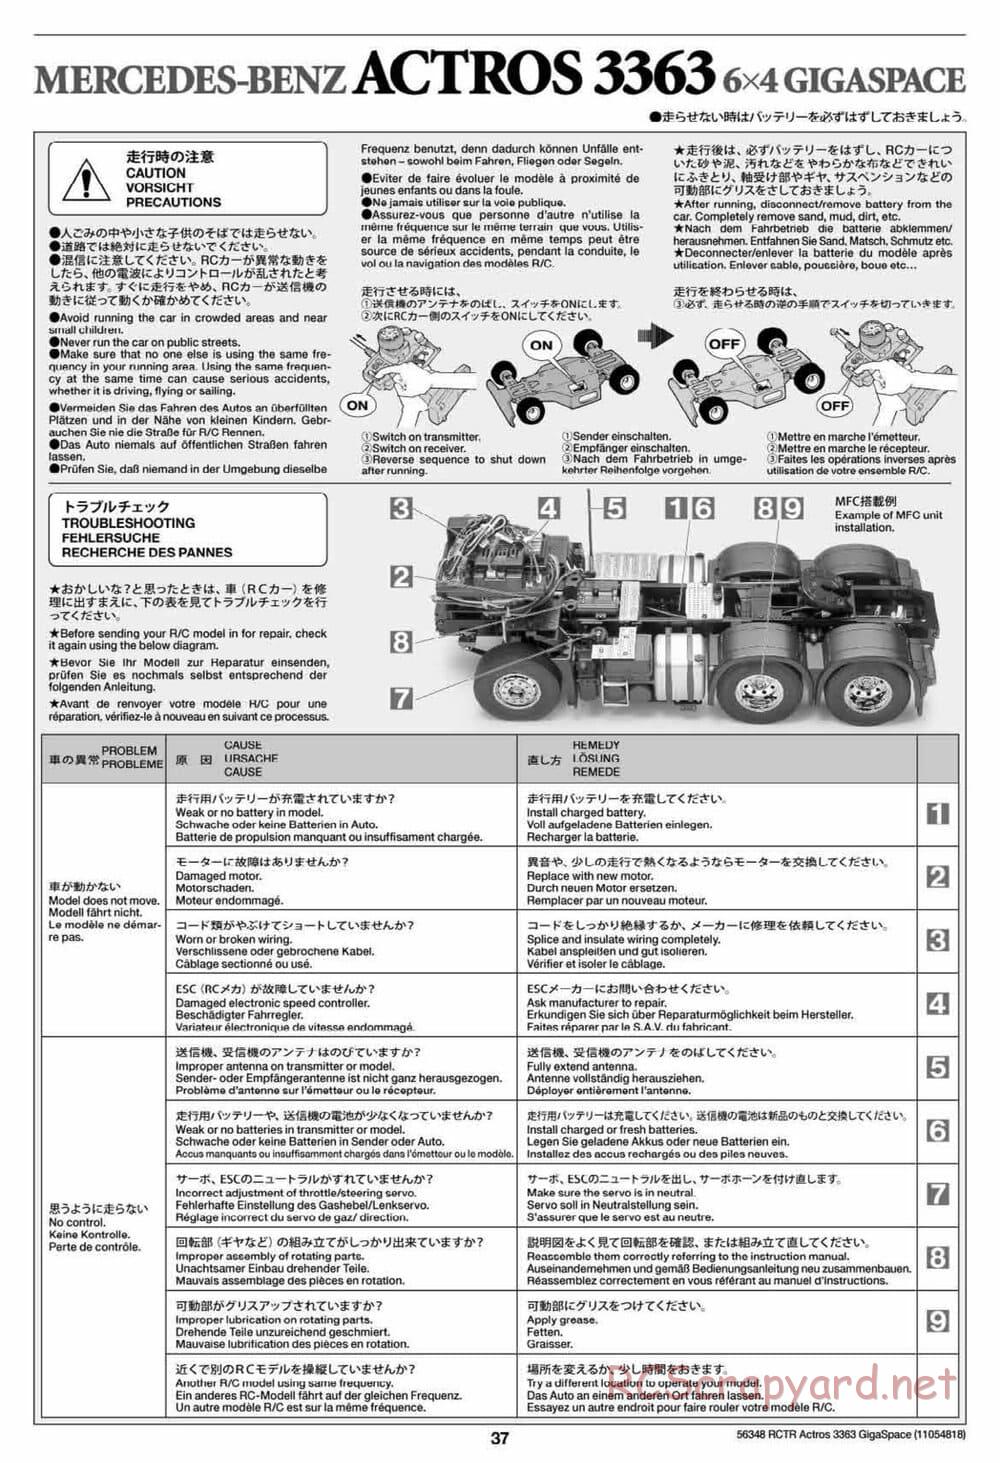 Tamiya - Mercedes-Benz Actros 3363 6x4 GigaSpace Tractor Truck Chassis - Manual - Page 37